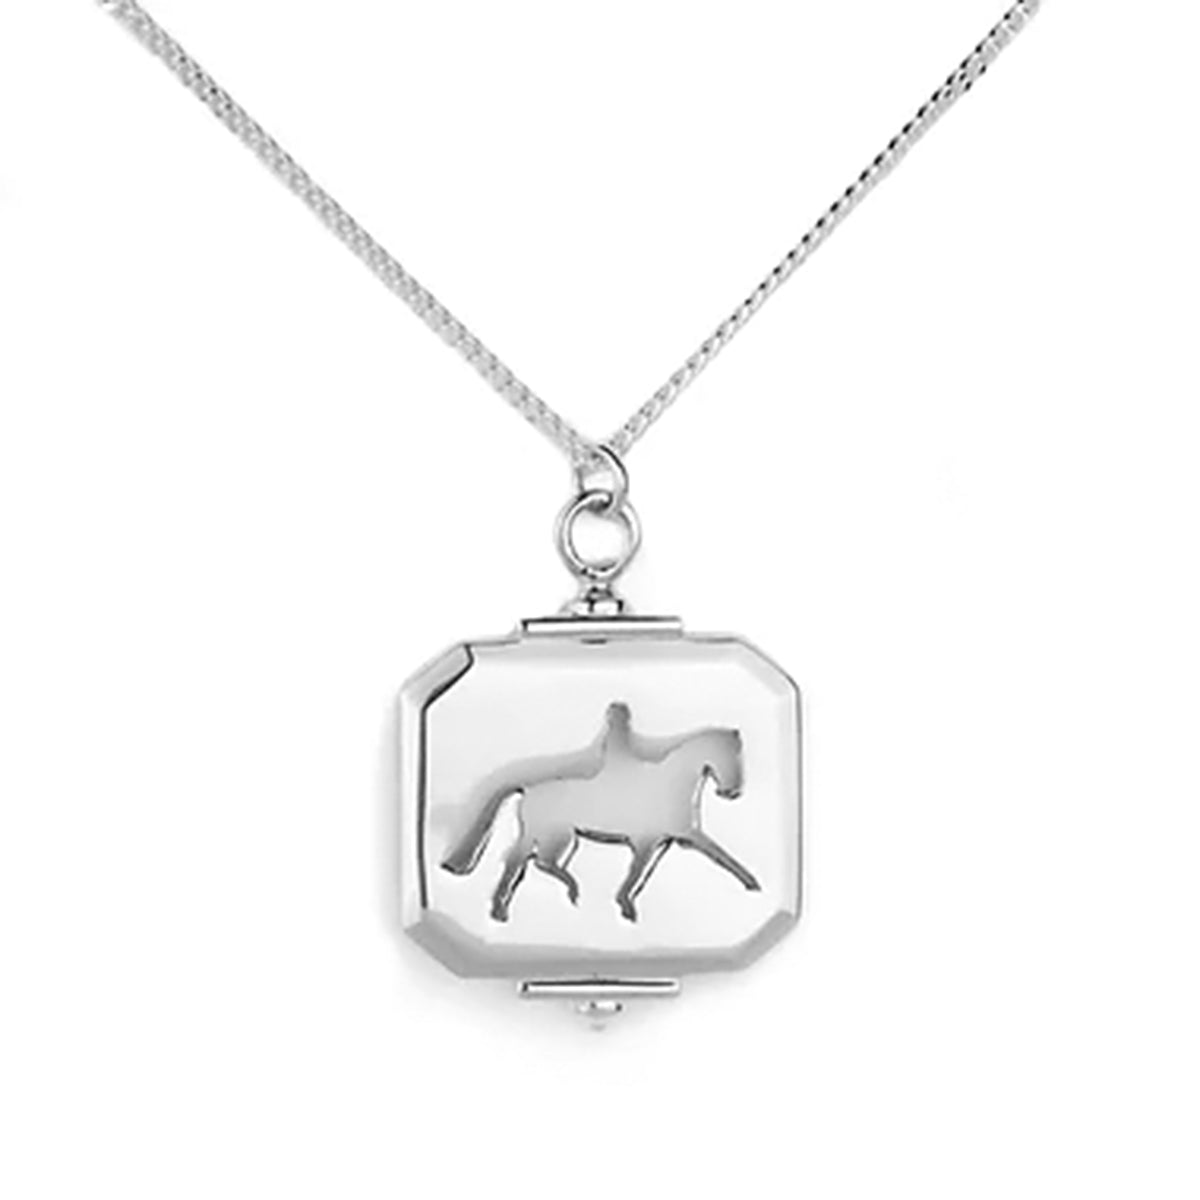 Loriece Extended Trot Dressage Horse Necklace